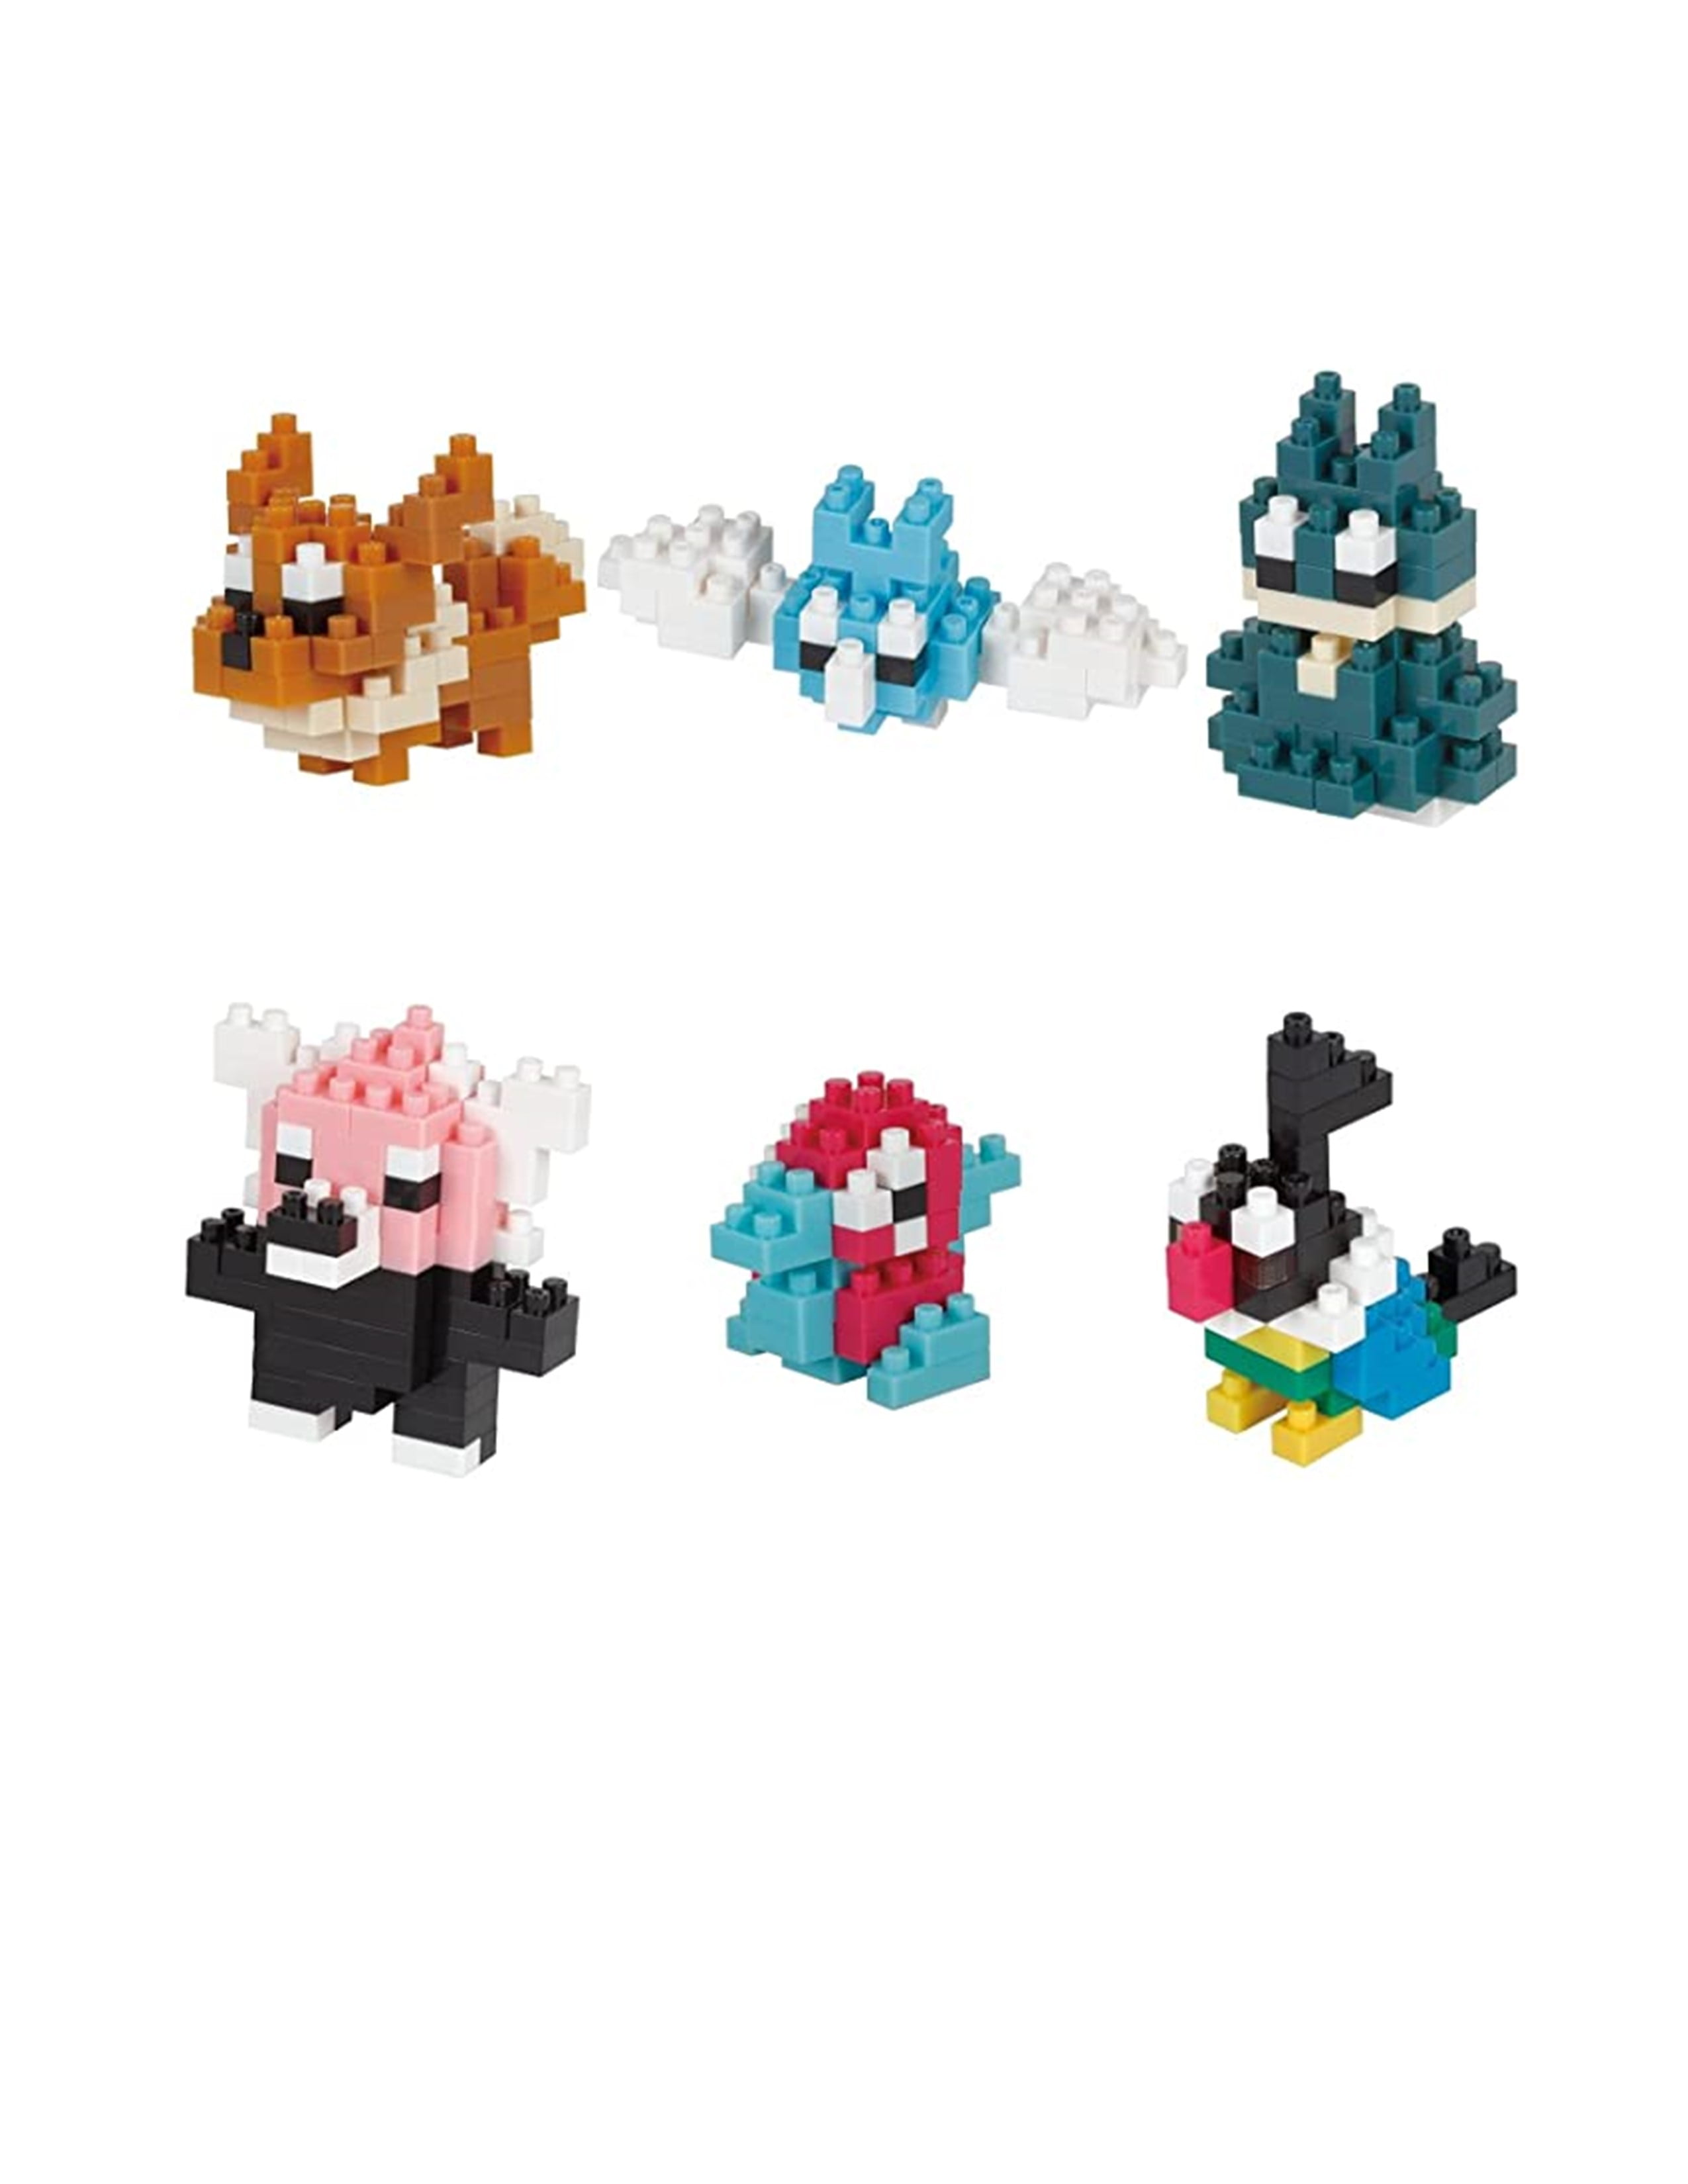 Nanoblocks Event Exclusive Set Available on Bluefin Brands